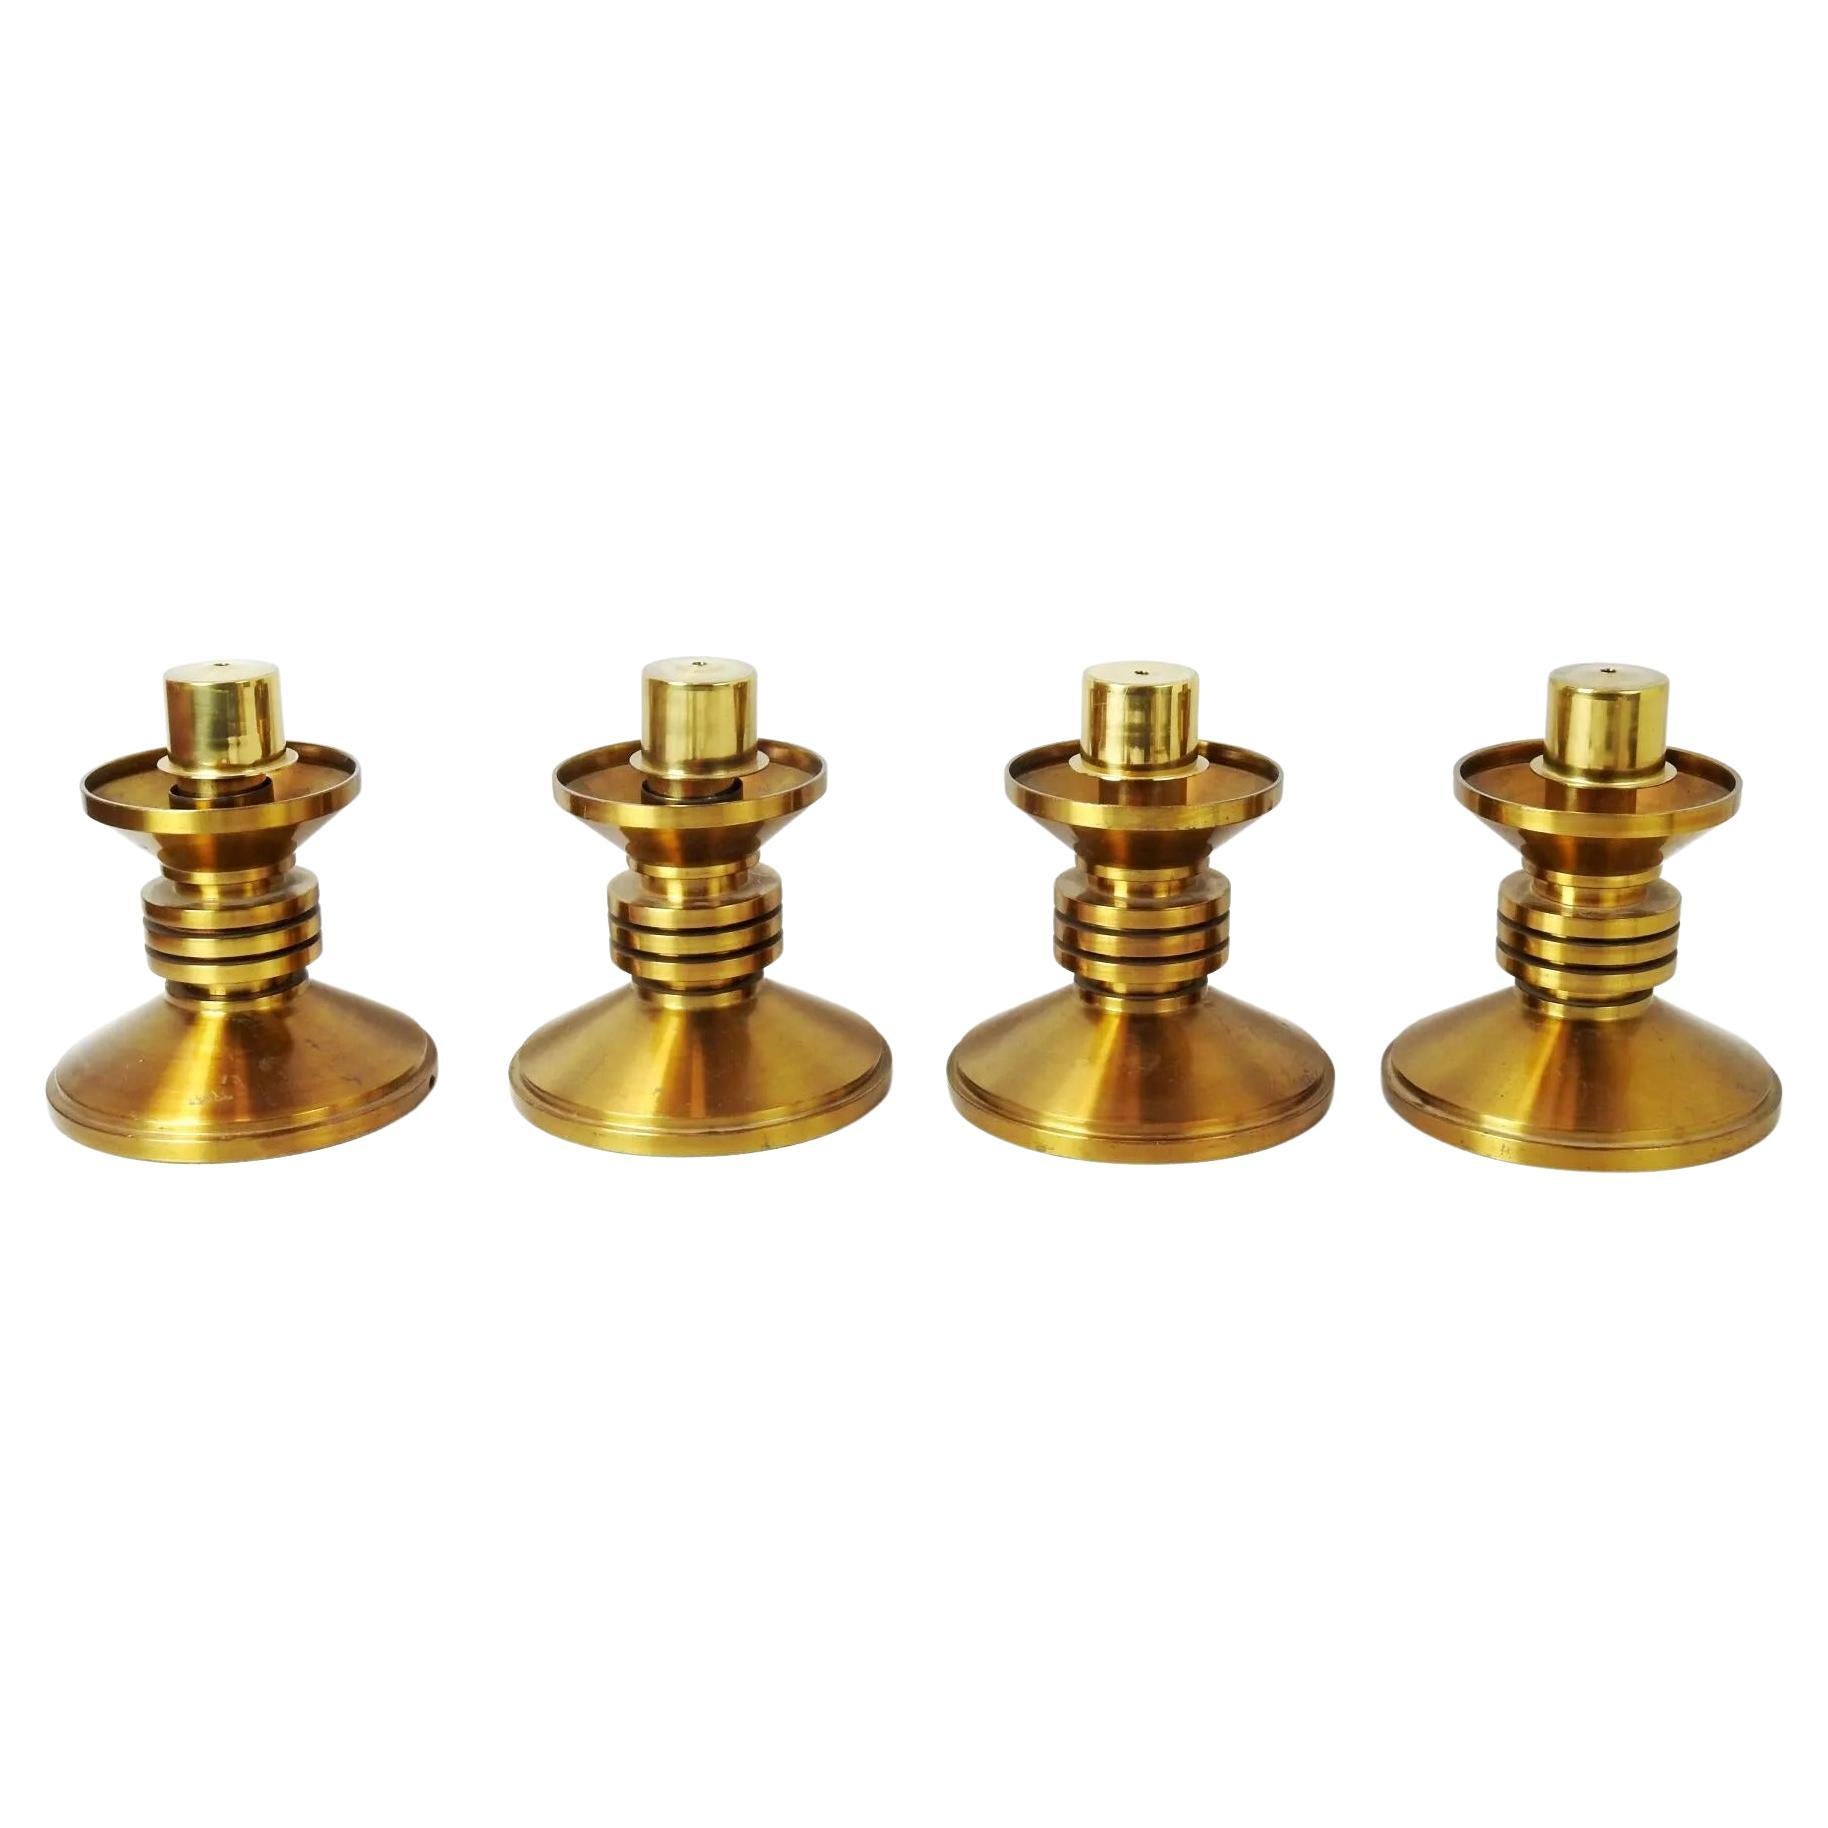 4 Small Silver-Plated Candlesticks with a Very Beautiful Decoration of Cords